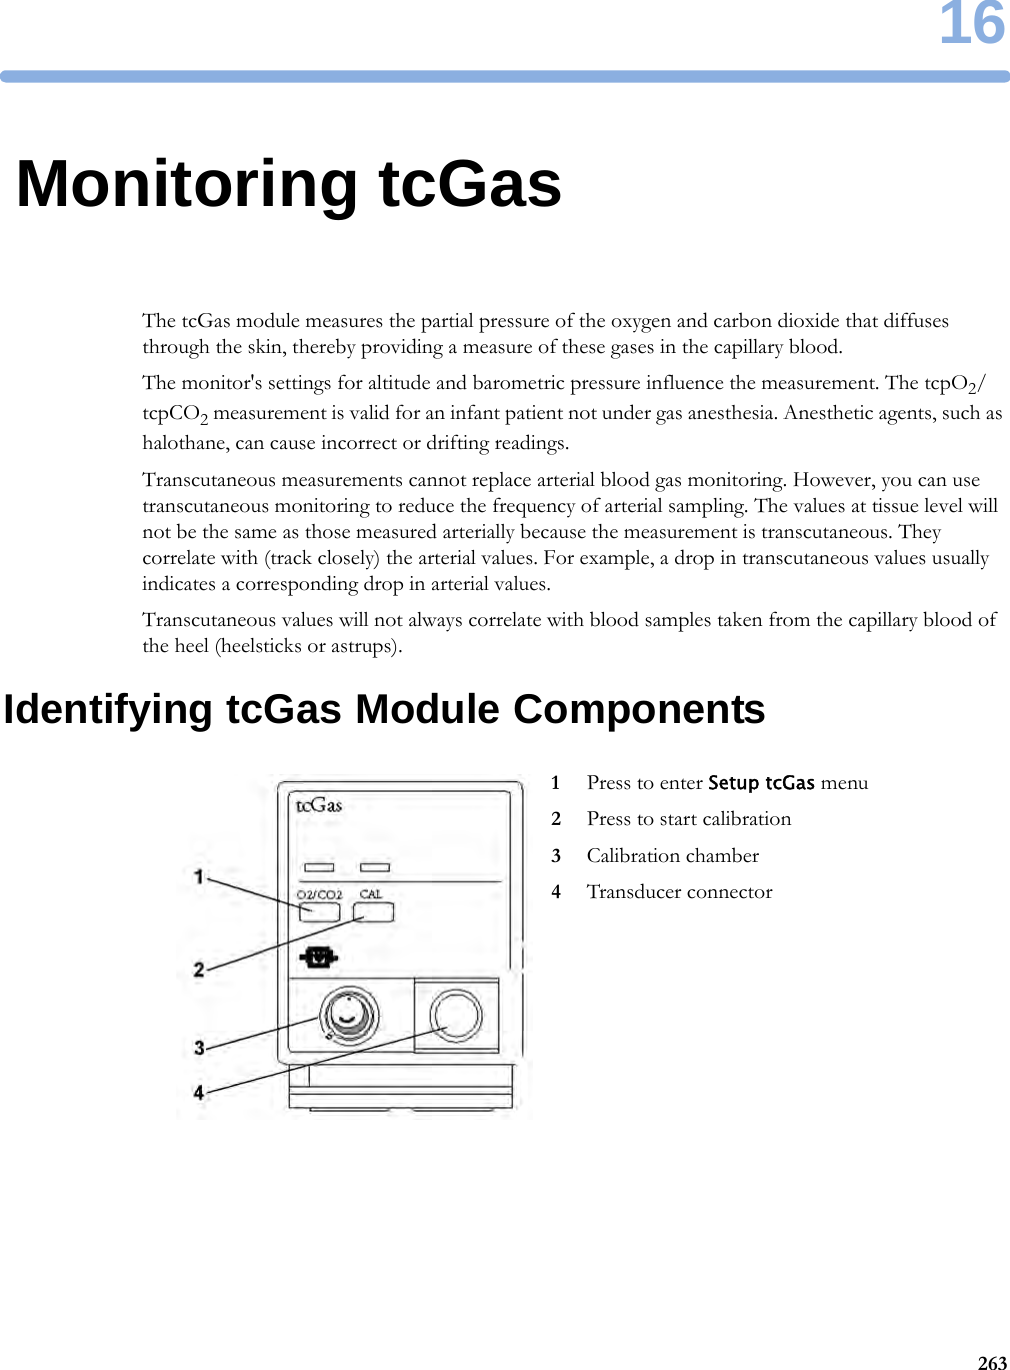 1626316Monitoring tcGasThe tcGas module measures the partial pressure of the oxygen and carbon dioxide that diffuses through the skin, thereby providing a measure of these gases in the capillary blood.The monitor&apos;s settings for altitude and barometric pressure influence the measurement. The tcpO2/tcpCO2 measurement is valid for an infant patient not under gas anesthesia. Anesthetic agents, such as halothane, can cause incorrect or drifting readings.Transcutaneous measurements cannot replace arterial blood gas monitoring. However, you can use transcutaneous monitoring to reduce the frequency of arterial sampling. The values at tissue level will not be the same as those measured arterially because the measurement is transcutaneous. They correlate with (track closely) the arterial values. For example, a drop in transcutaneous values usually indicates a corresponding drop in arterial values.Transcutaneous values will not always correlate with blood samples taken from the capillary blood of the heel (heelsticks or astrups).Identifying tcGas Module Components1Press to enter Setup tcGas menu2Press to start calibration3Calibration chamber4Transducer connector